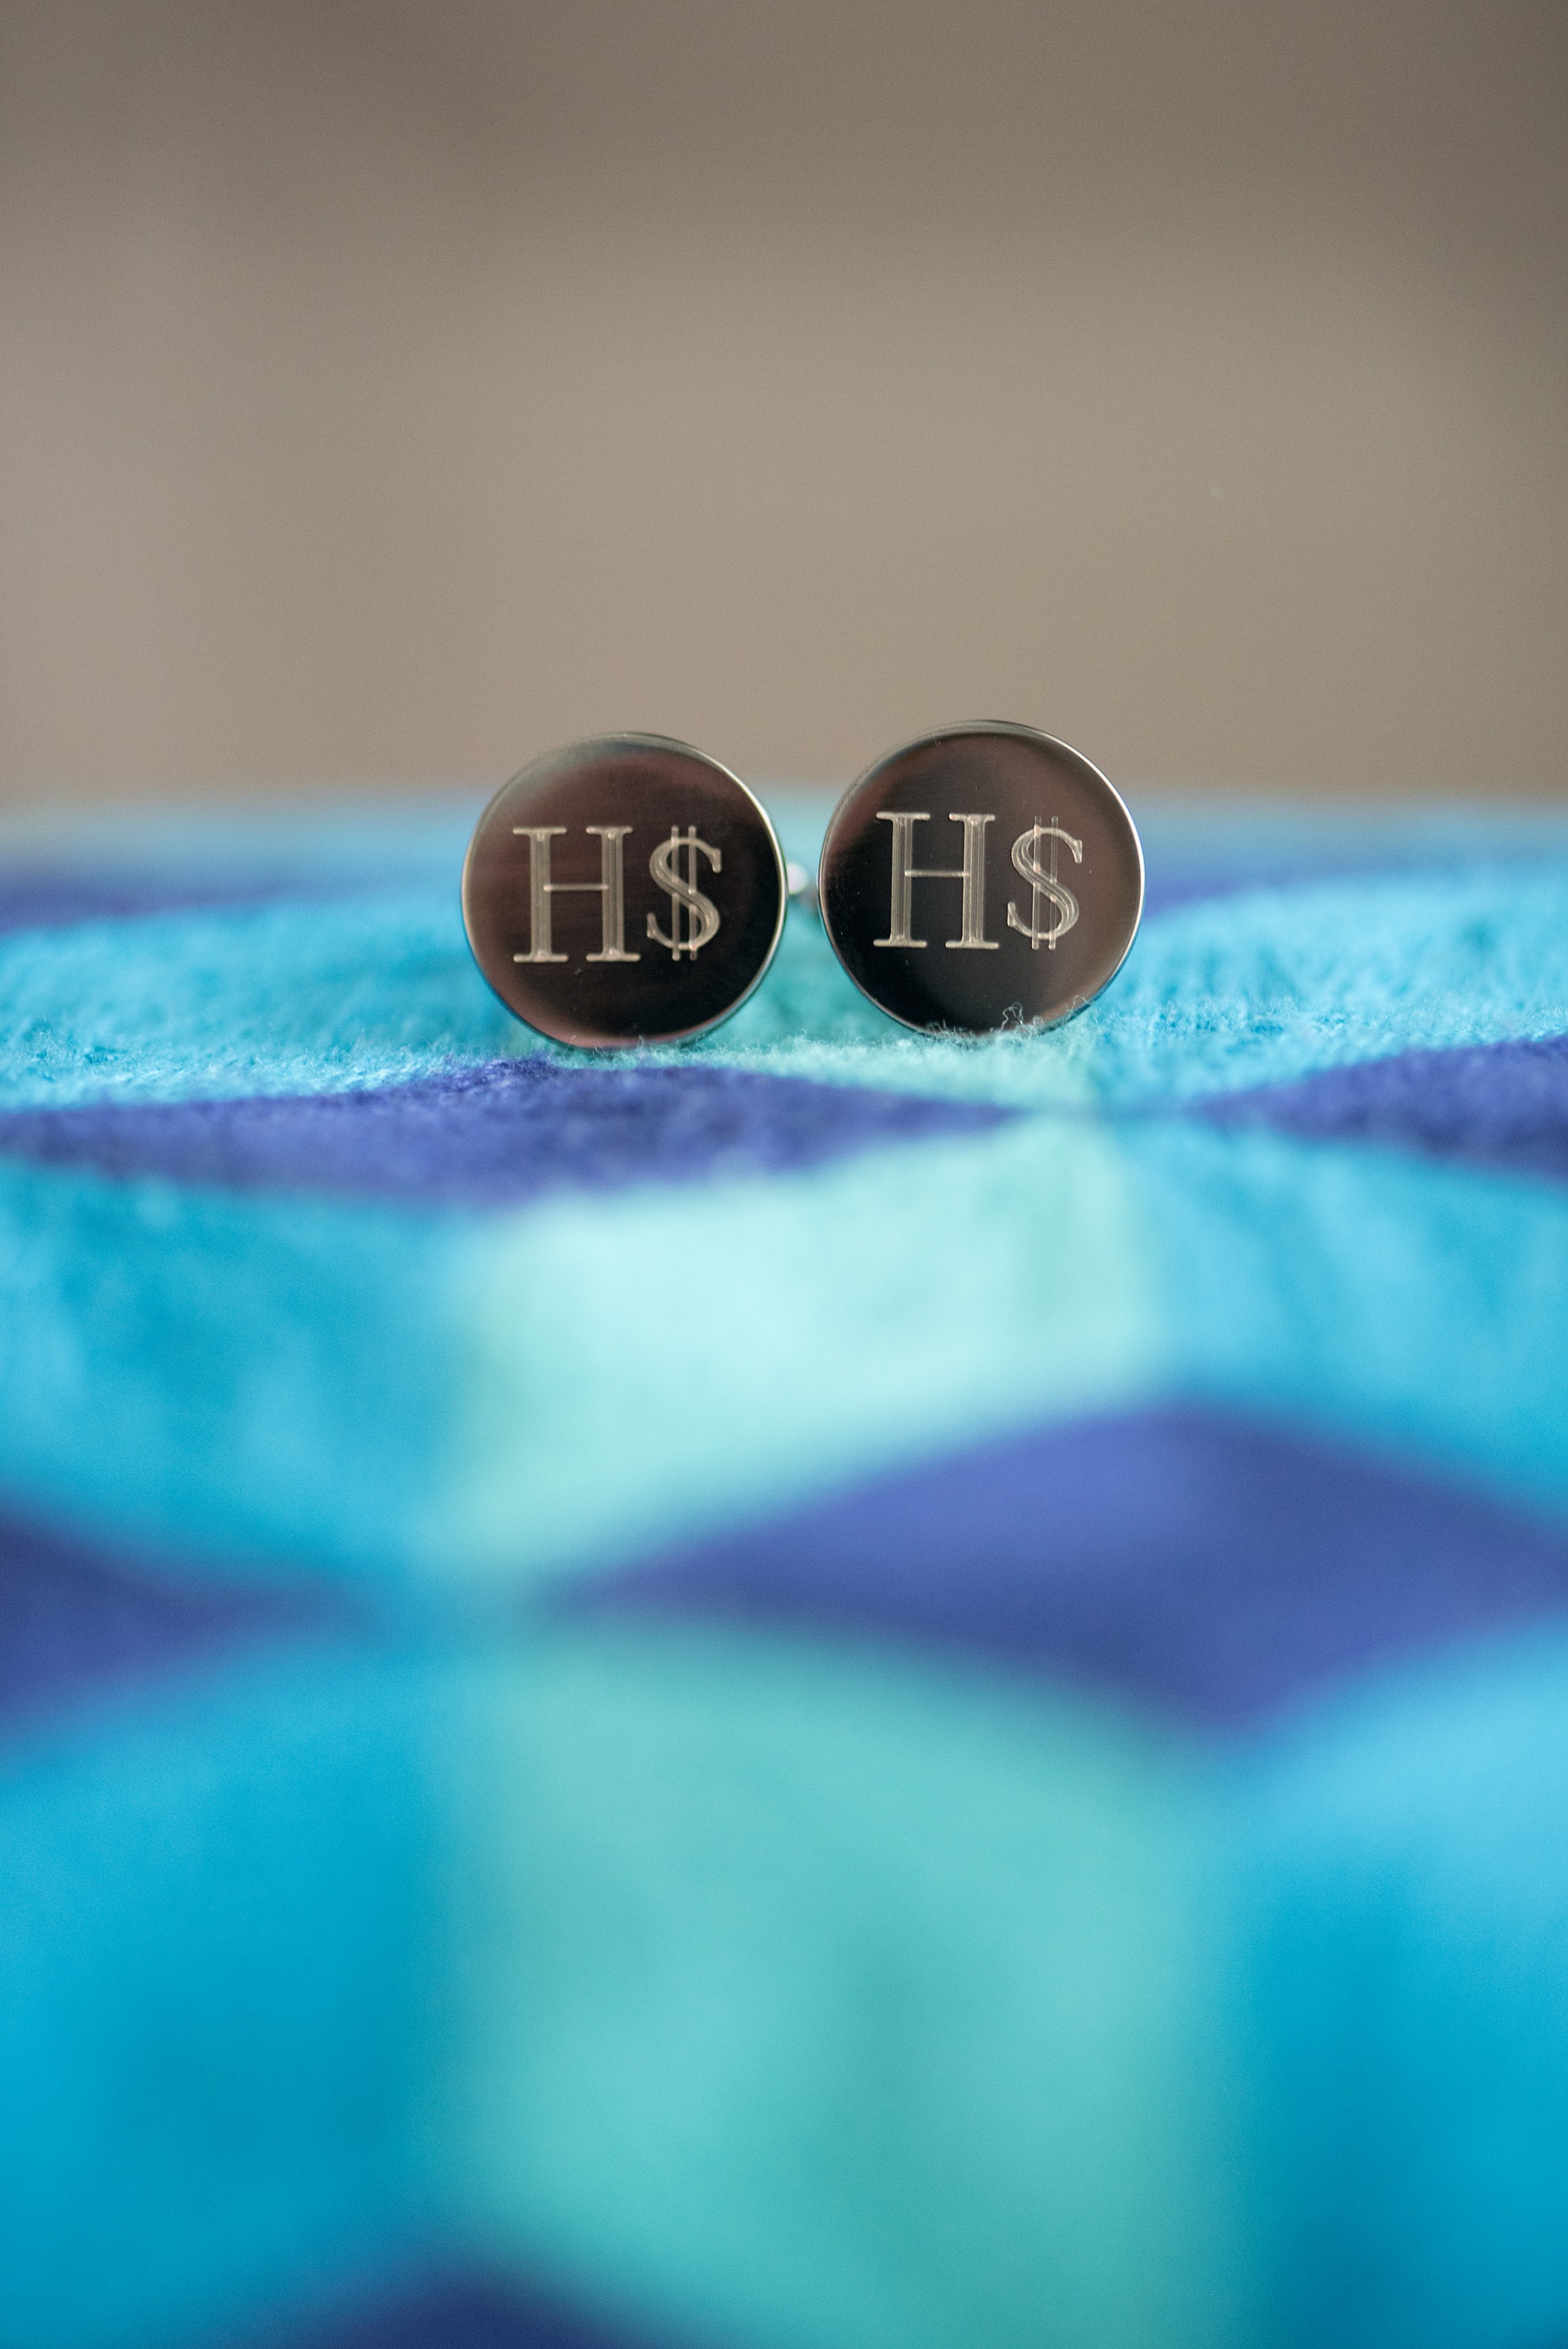 Photos from a wedding at Eau Palm Beach resort in Florida by Mikkel Paige Photography. This spa is also a beautiful destination for luxury weddings. The groom wore custom gunmetal cufflinks from his bride for a unique detail of their day. #Cufflinks #Groomdetails #Groom #weddingday #EauPalmBeach #FloridaWeddings